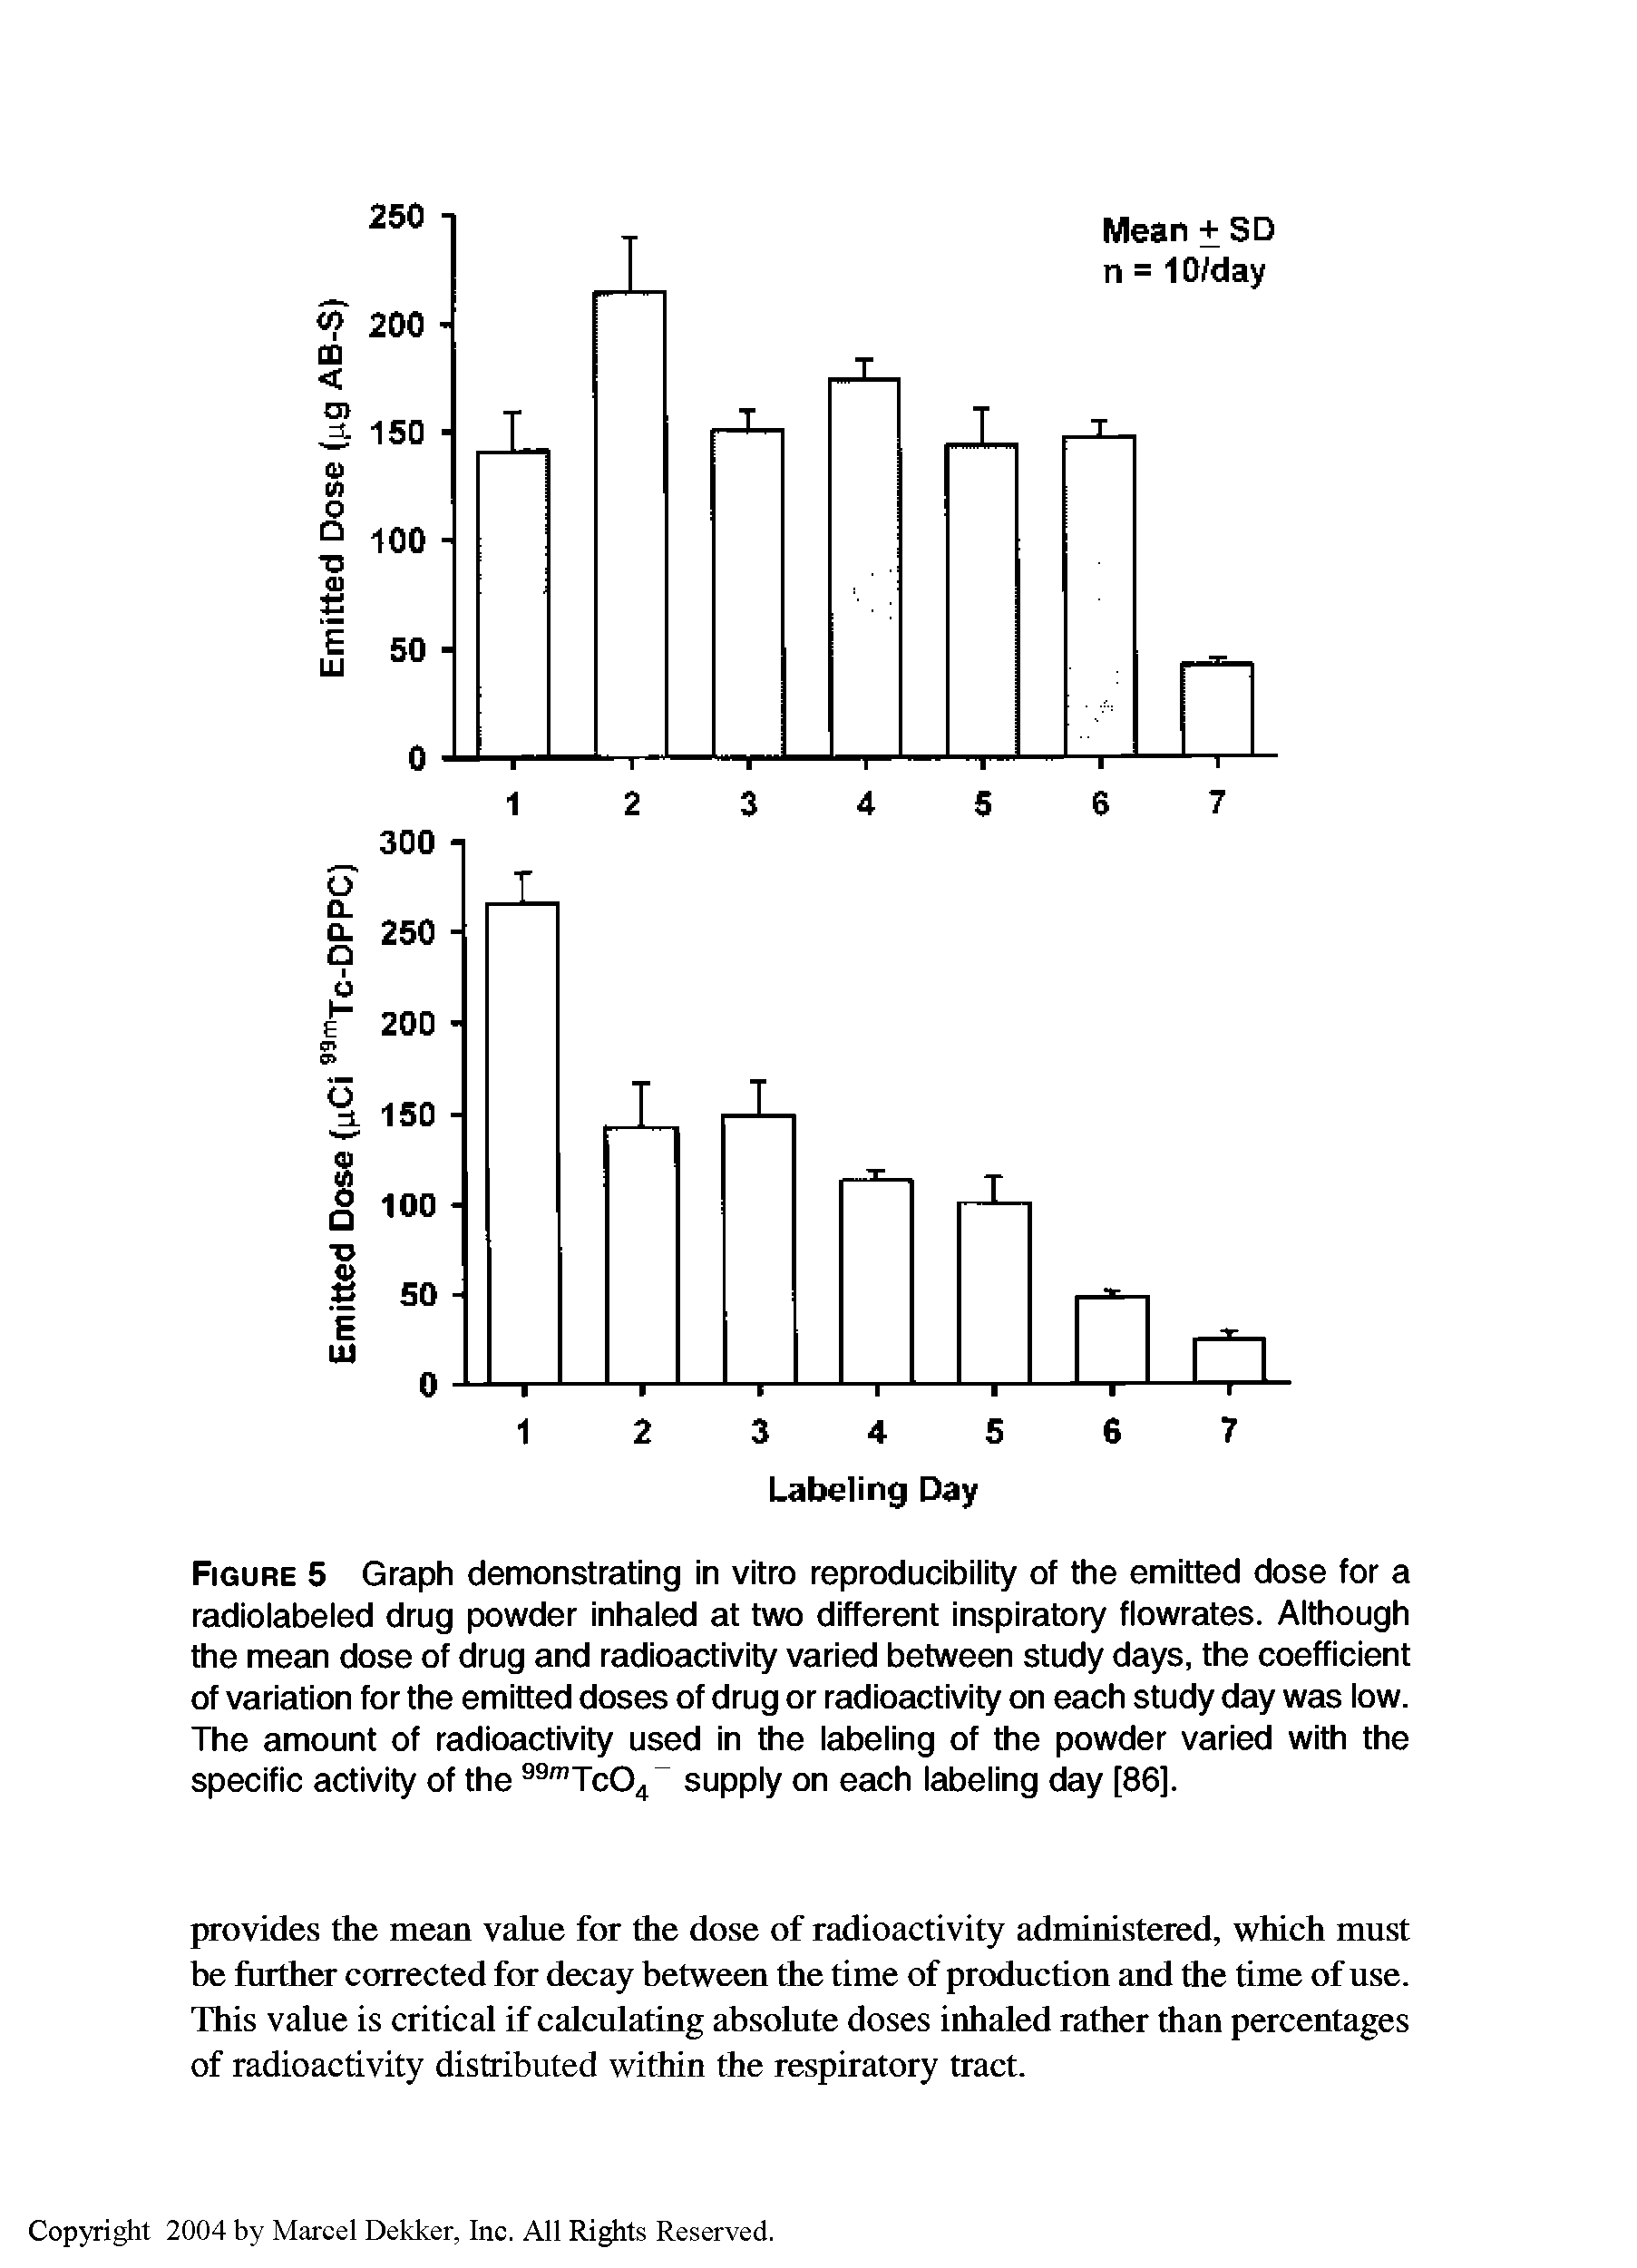 Figure 5 Graph demonstrating in vitro reproducibility of the emitted dose for a radiolabeled drug powder inhaled at two different inspiratory flowrates. Although the mean dose of drug and radioactivity varied between study days, the coefficient of variation for the emitted doses of drug or radioactivity on each study day was low. The amount of radioactivity used in the labeling of the powder varied with the specific activity of the 99mTc04 supply on each labeling day [86].